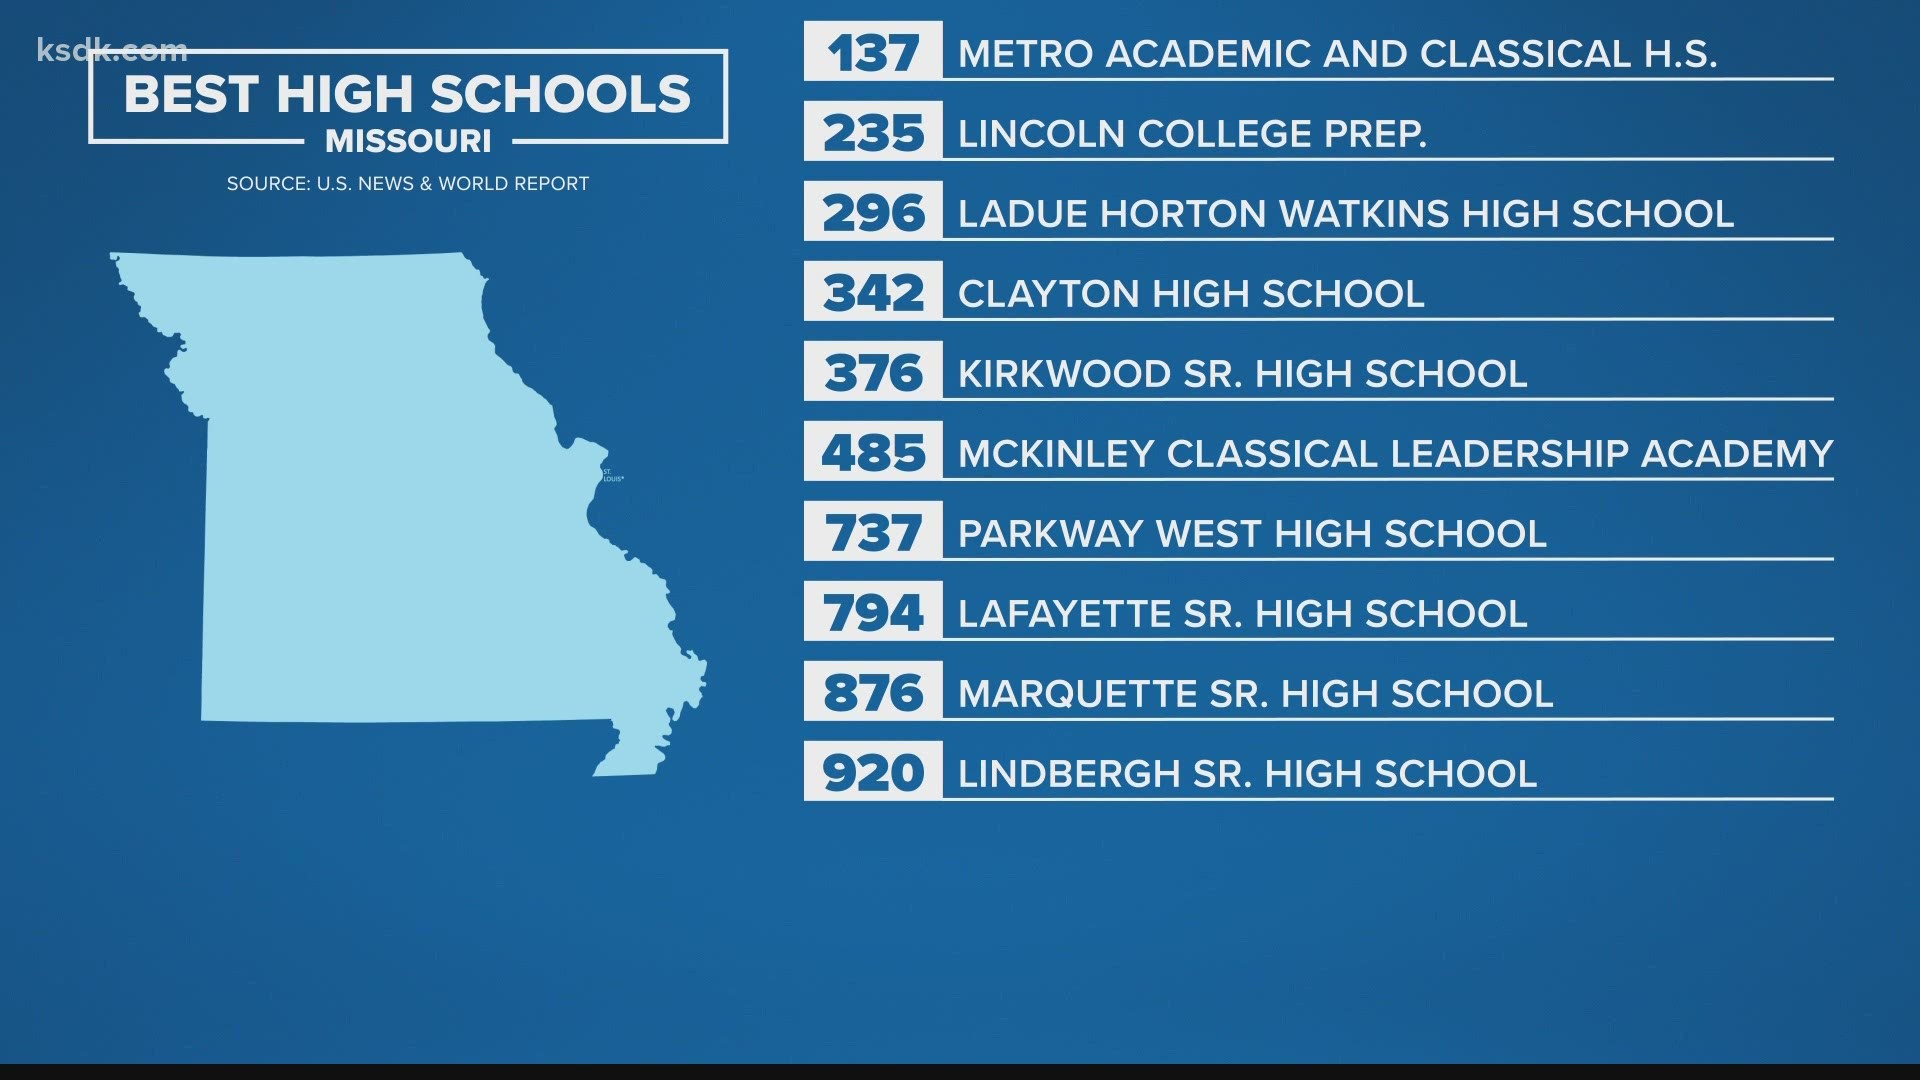 Metro Areas With the Most Top-Ranked High Schools in the U.S.